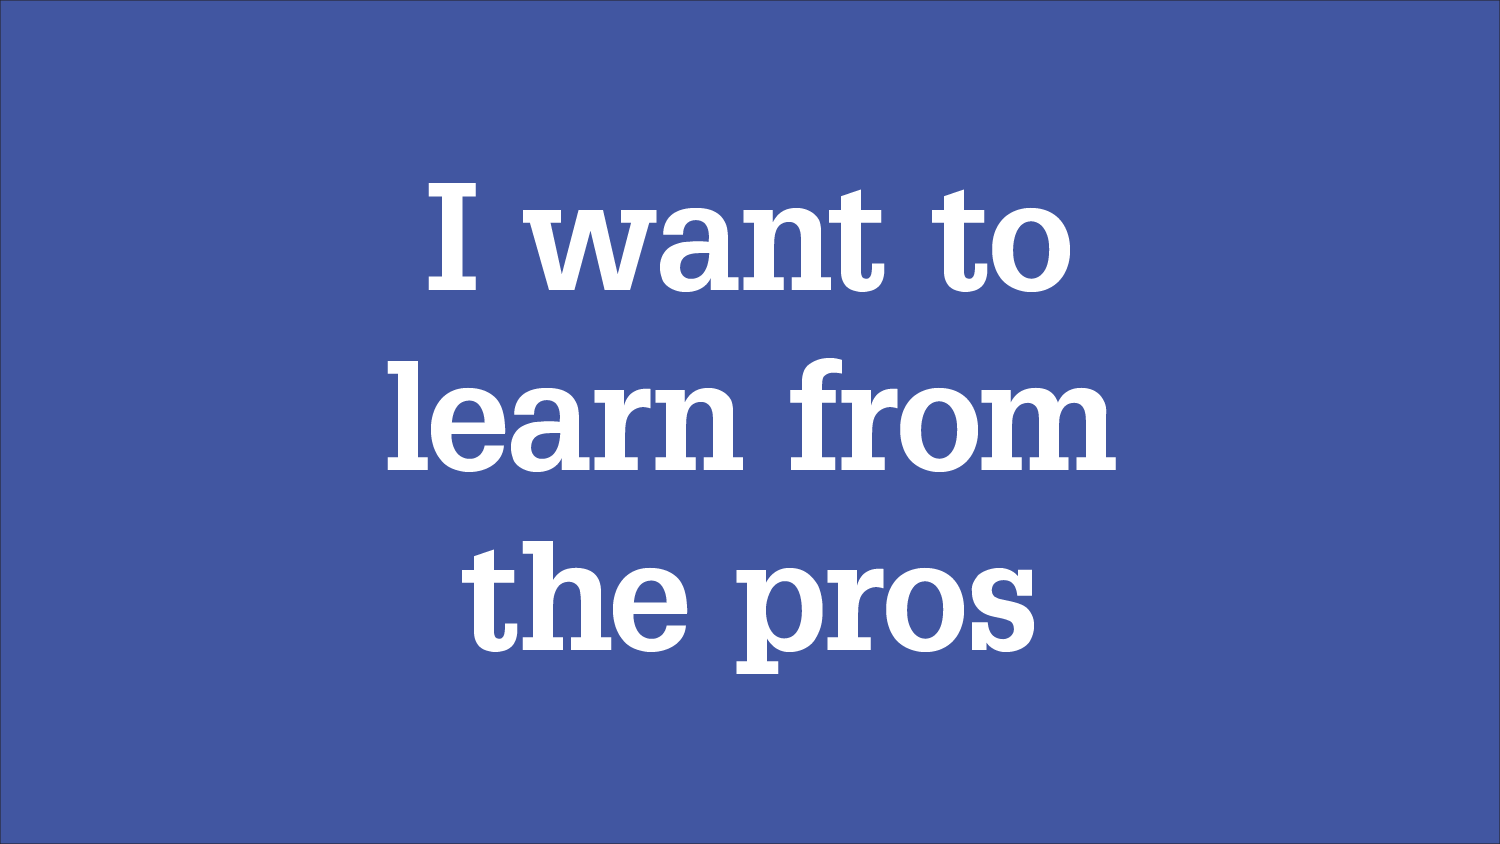 Graphic with message "I want to learn from the pros"